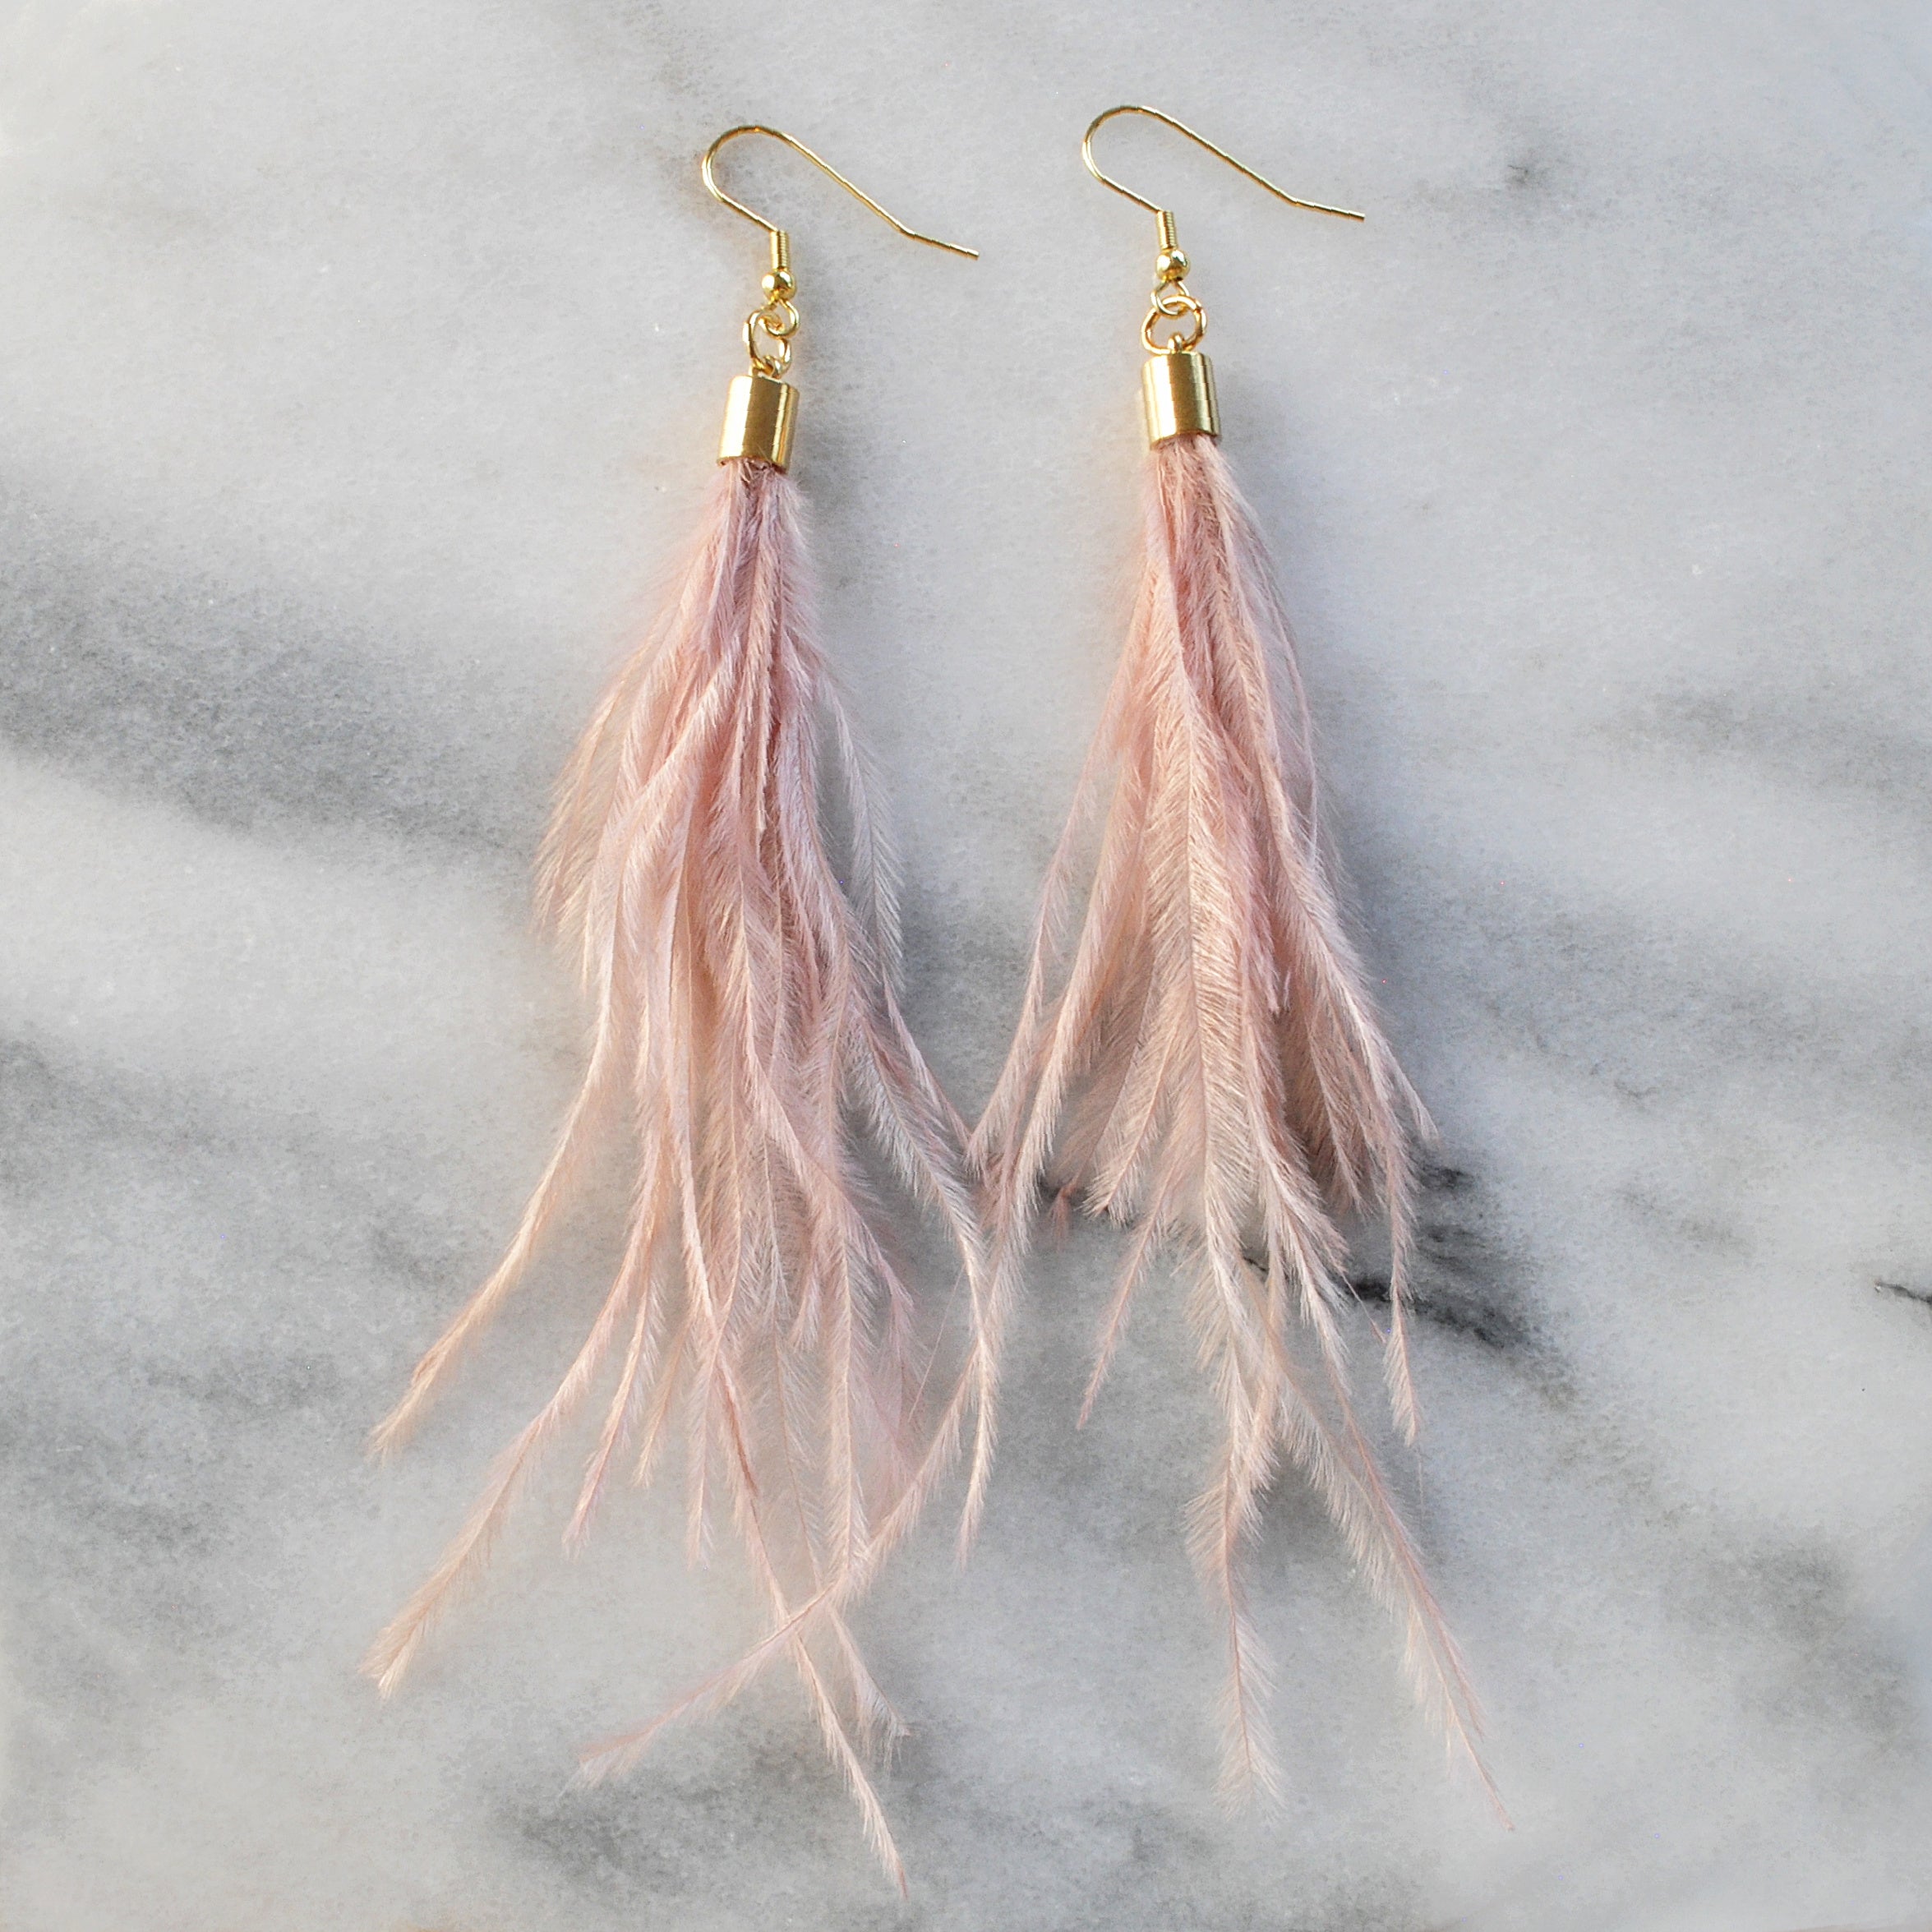 Pink Feather Earrings French Wire Leopard Print 3.5 in tall Pair | eBay